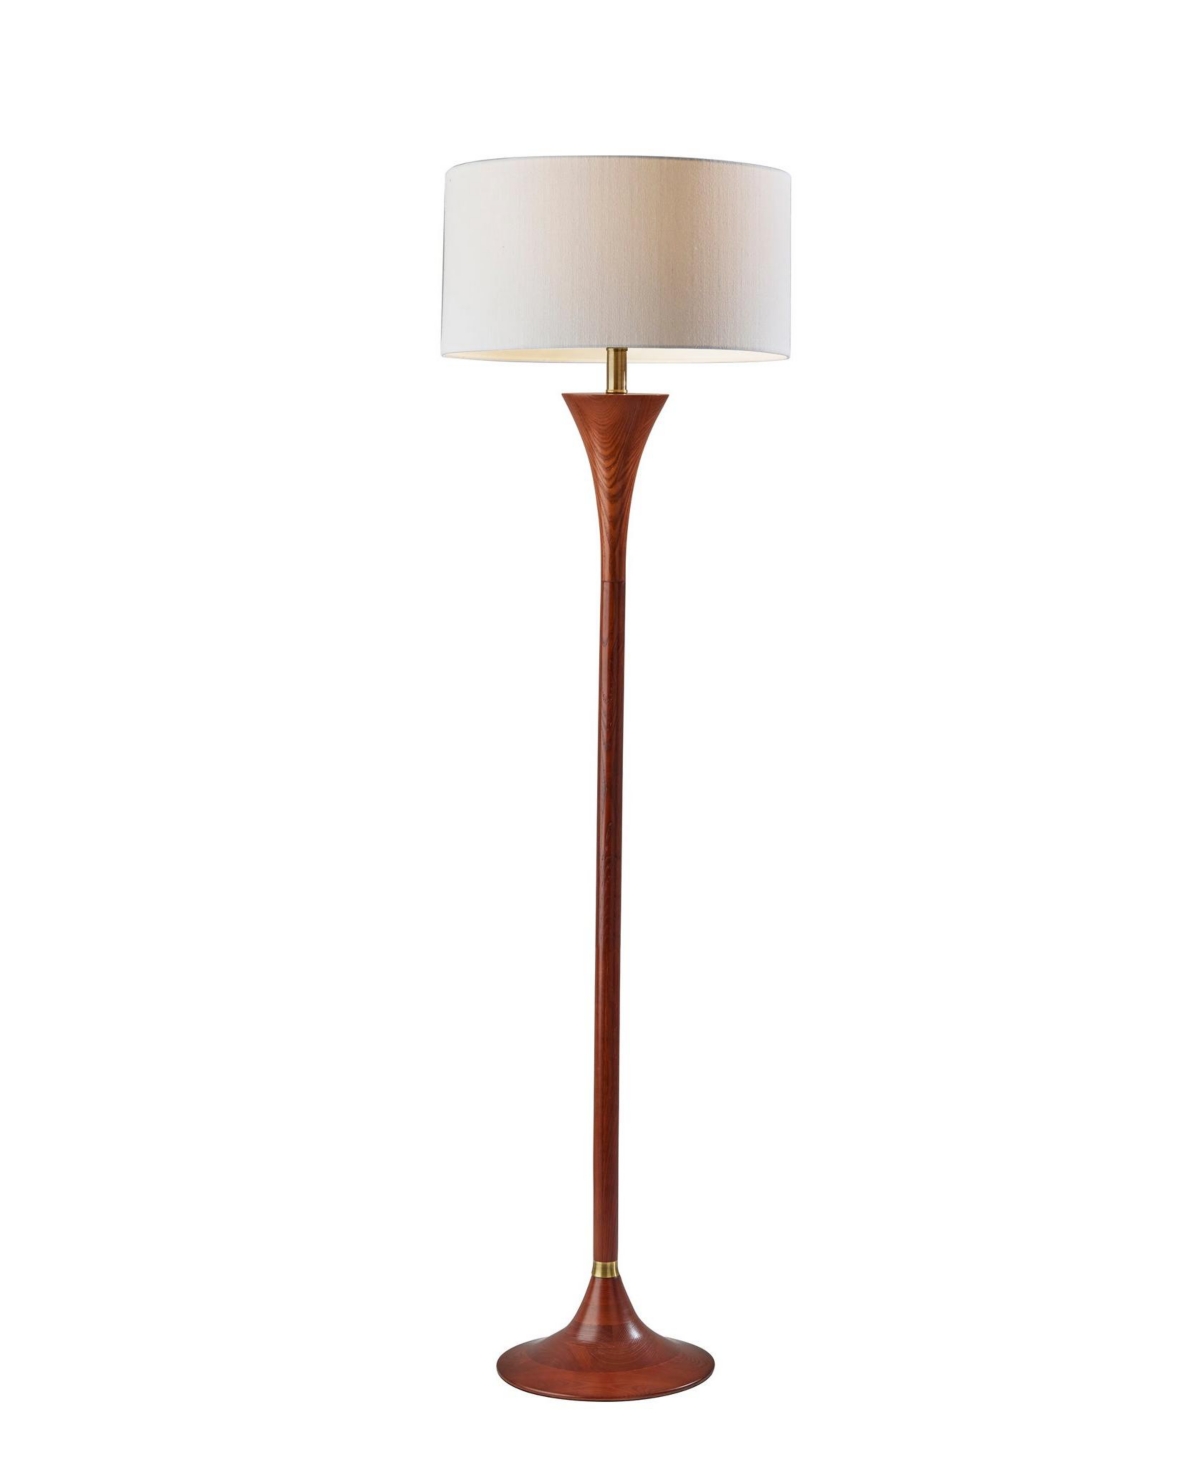 Adesso Rebecca Floor Lamp In Natural Rubberwood With Antique-like Bra